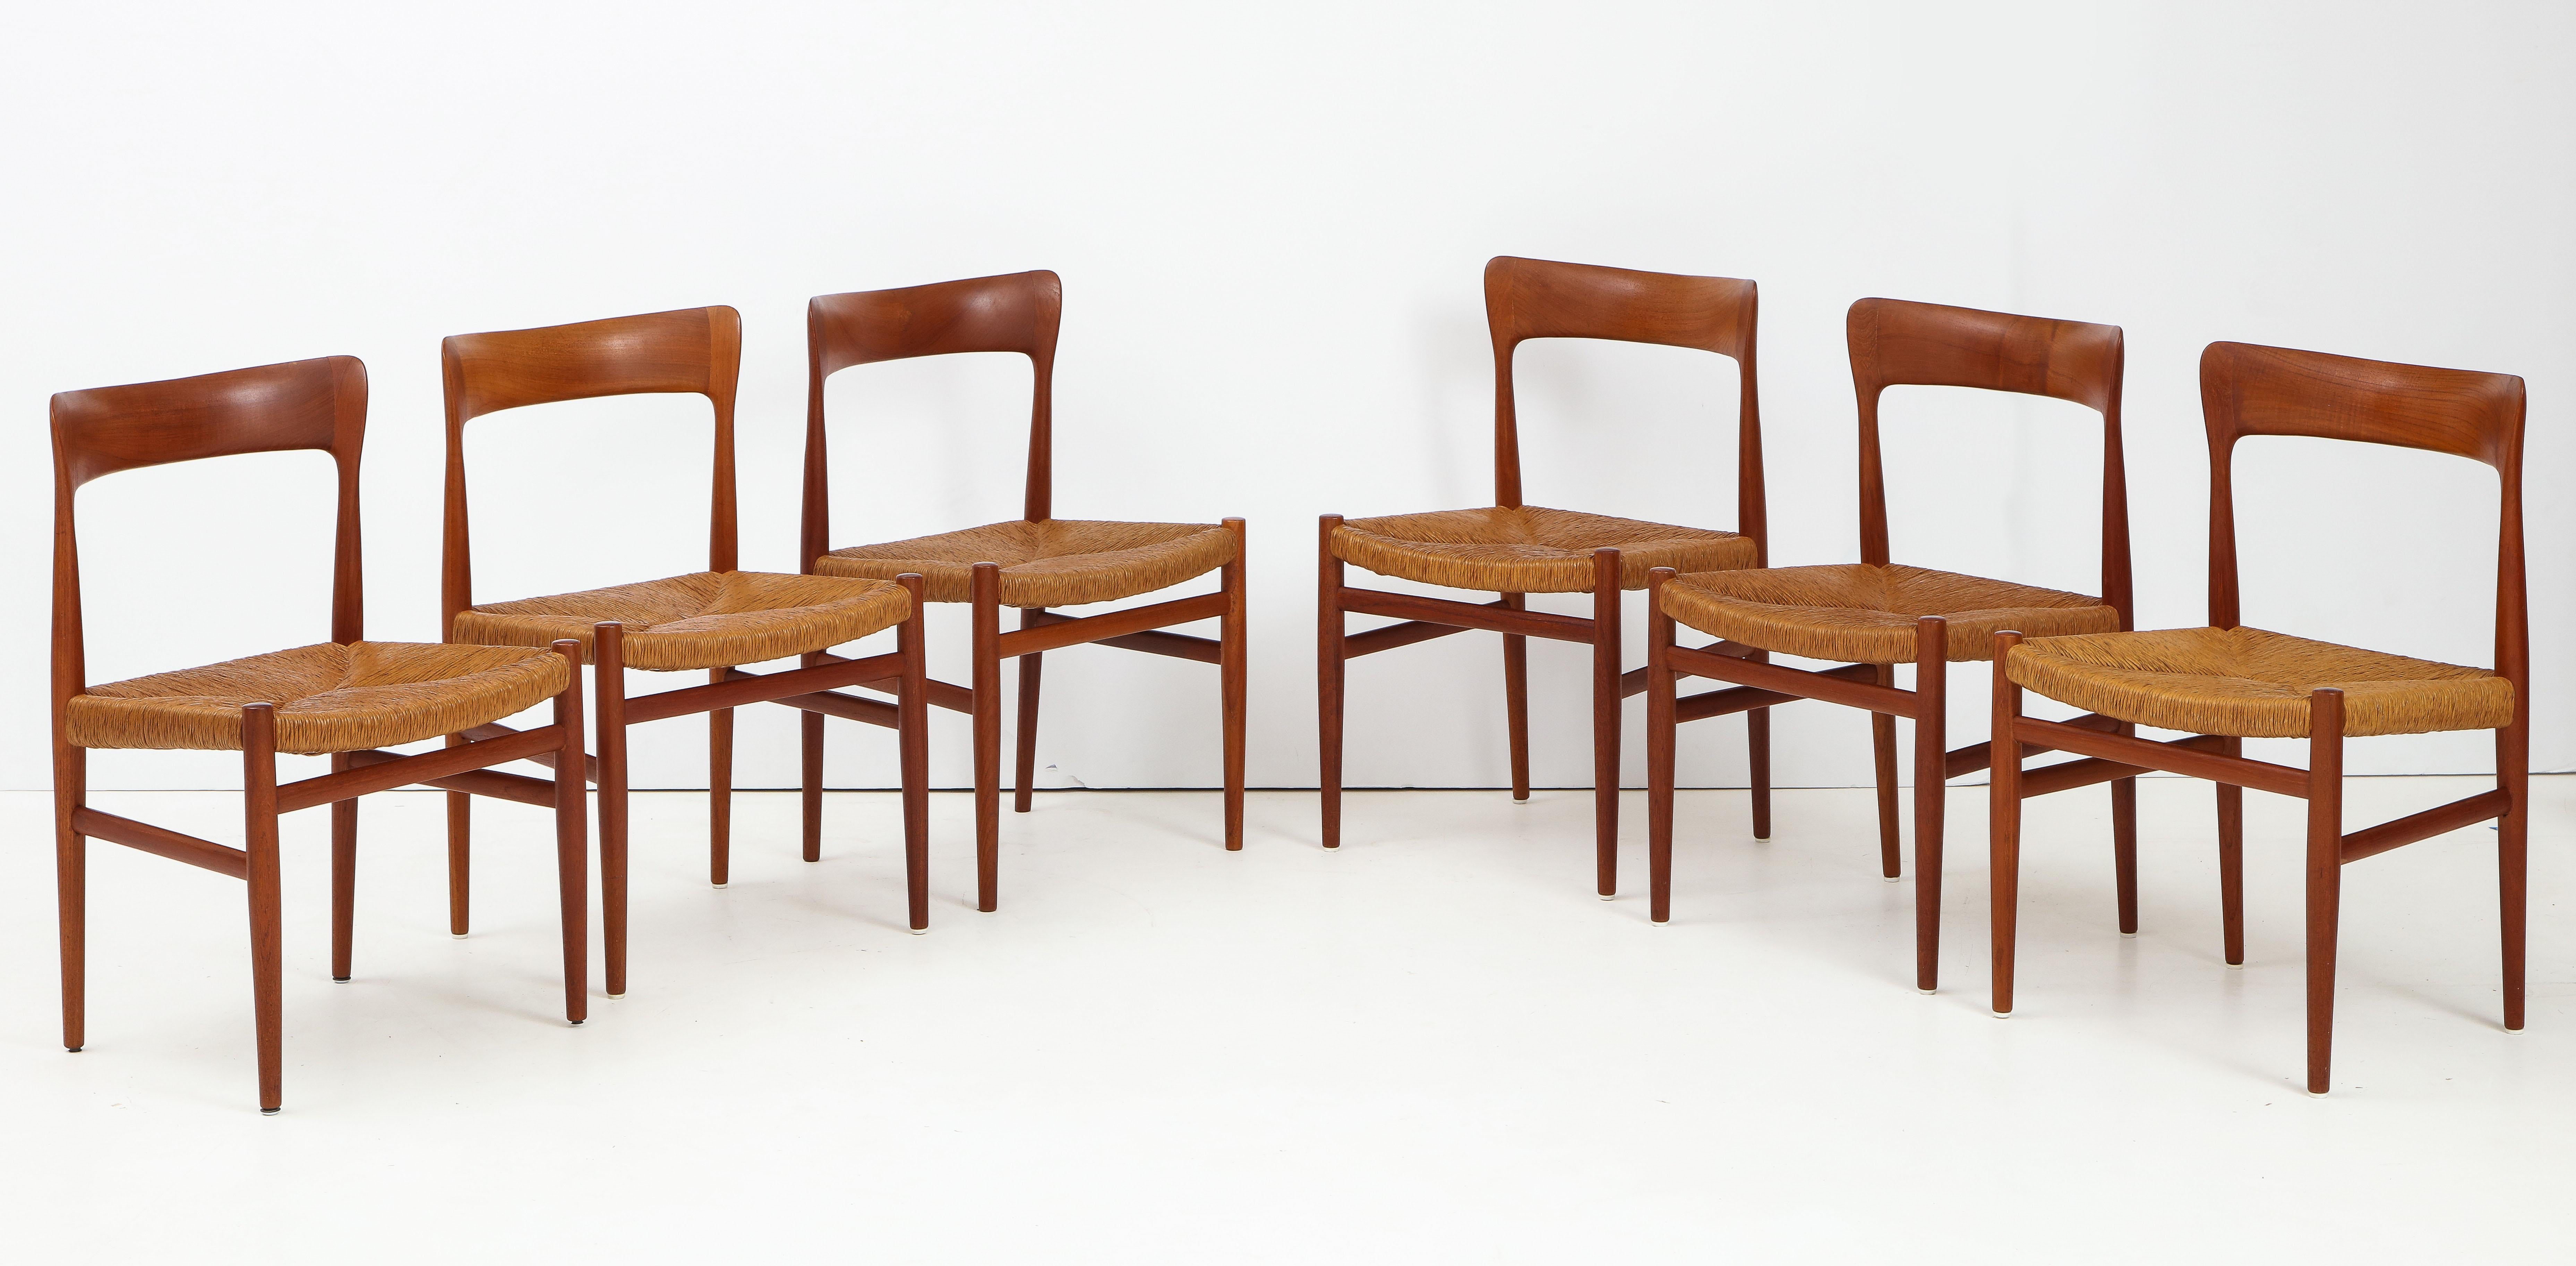 Stunning set of six Danish teak sculptural dining chairs. With vintage original paper cord seats.